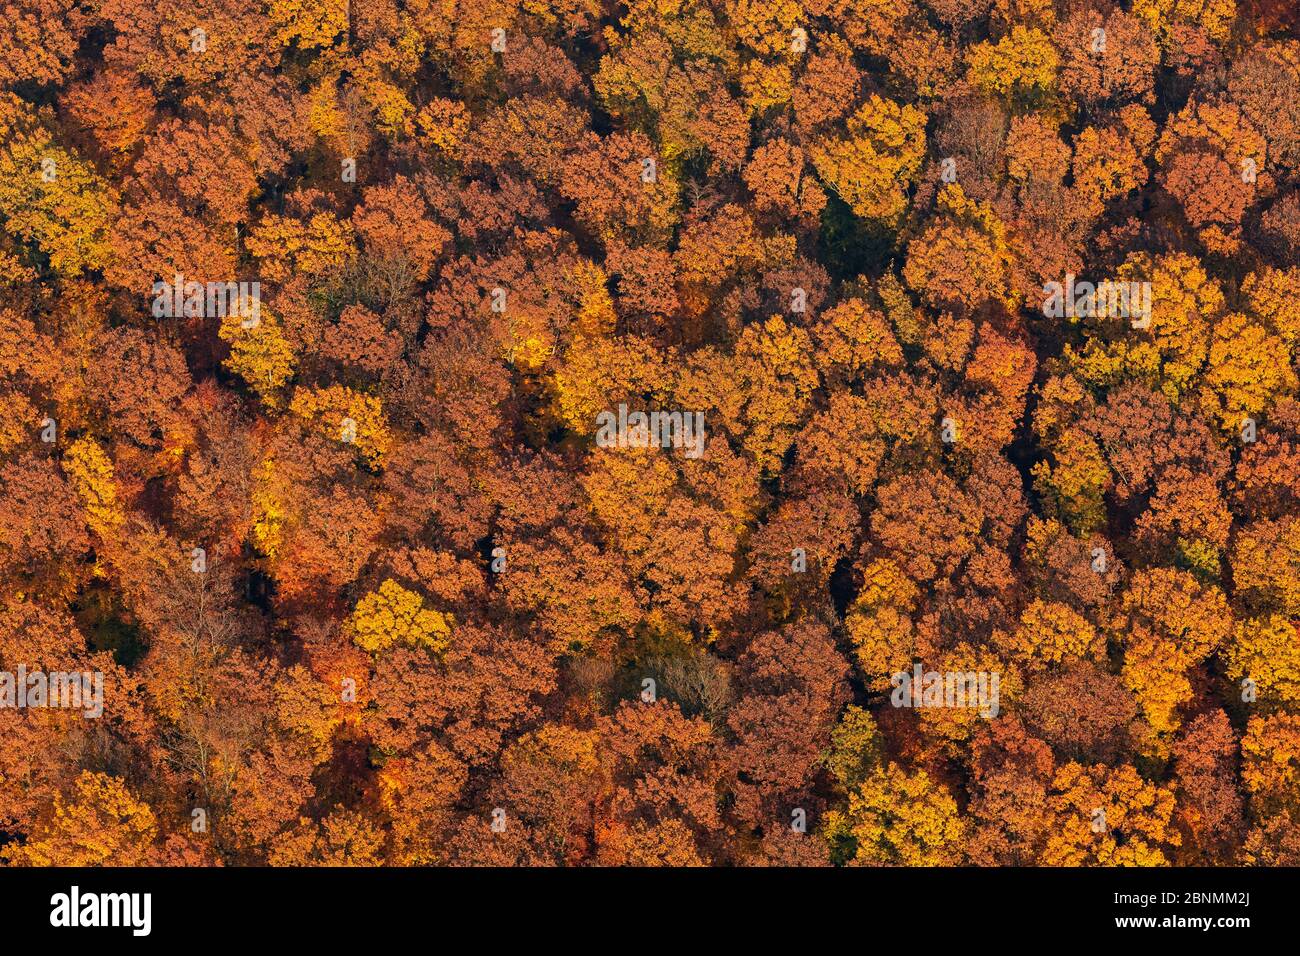 Primary beech (Fagus sylvatica) forest canopy in autumn (aerial), Spessart, Germany, October 2015. Stock Photo